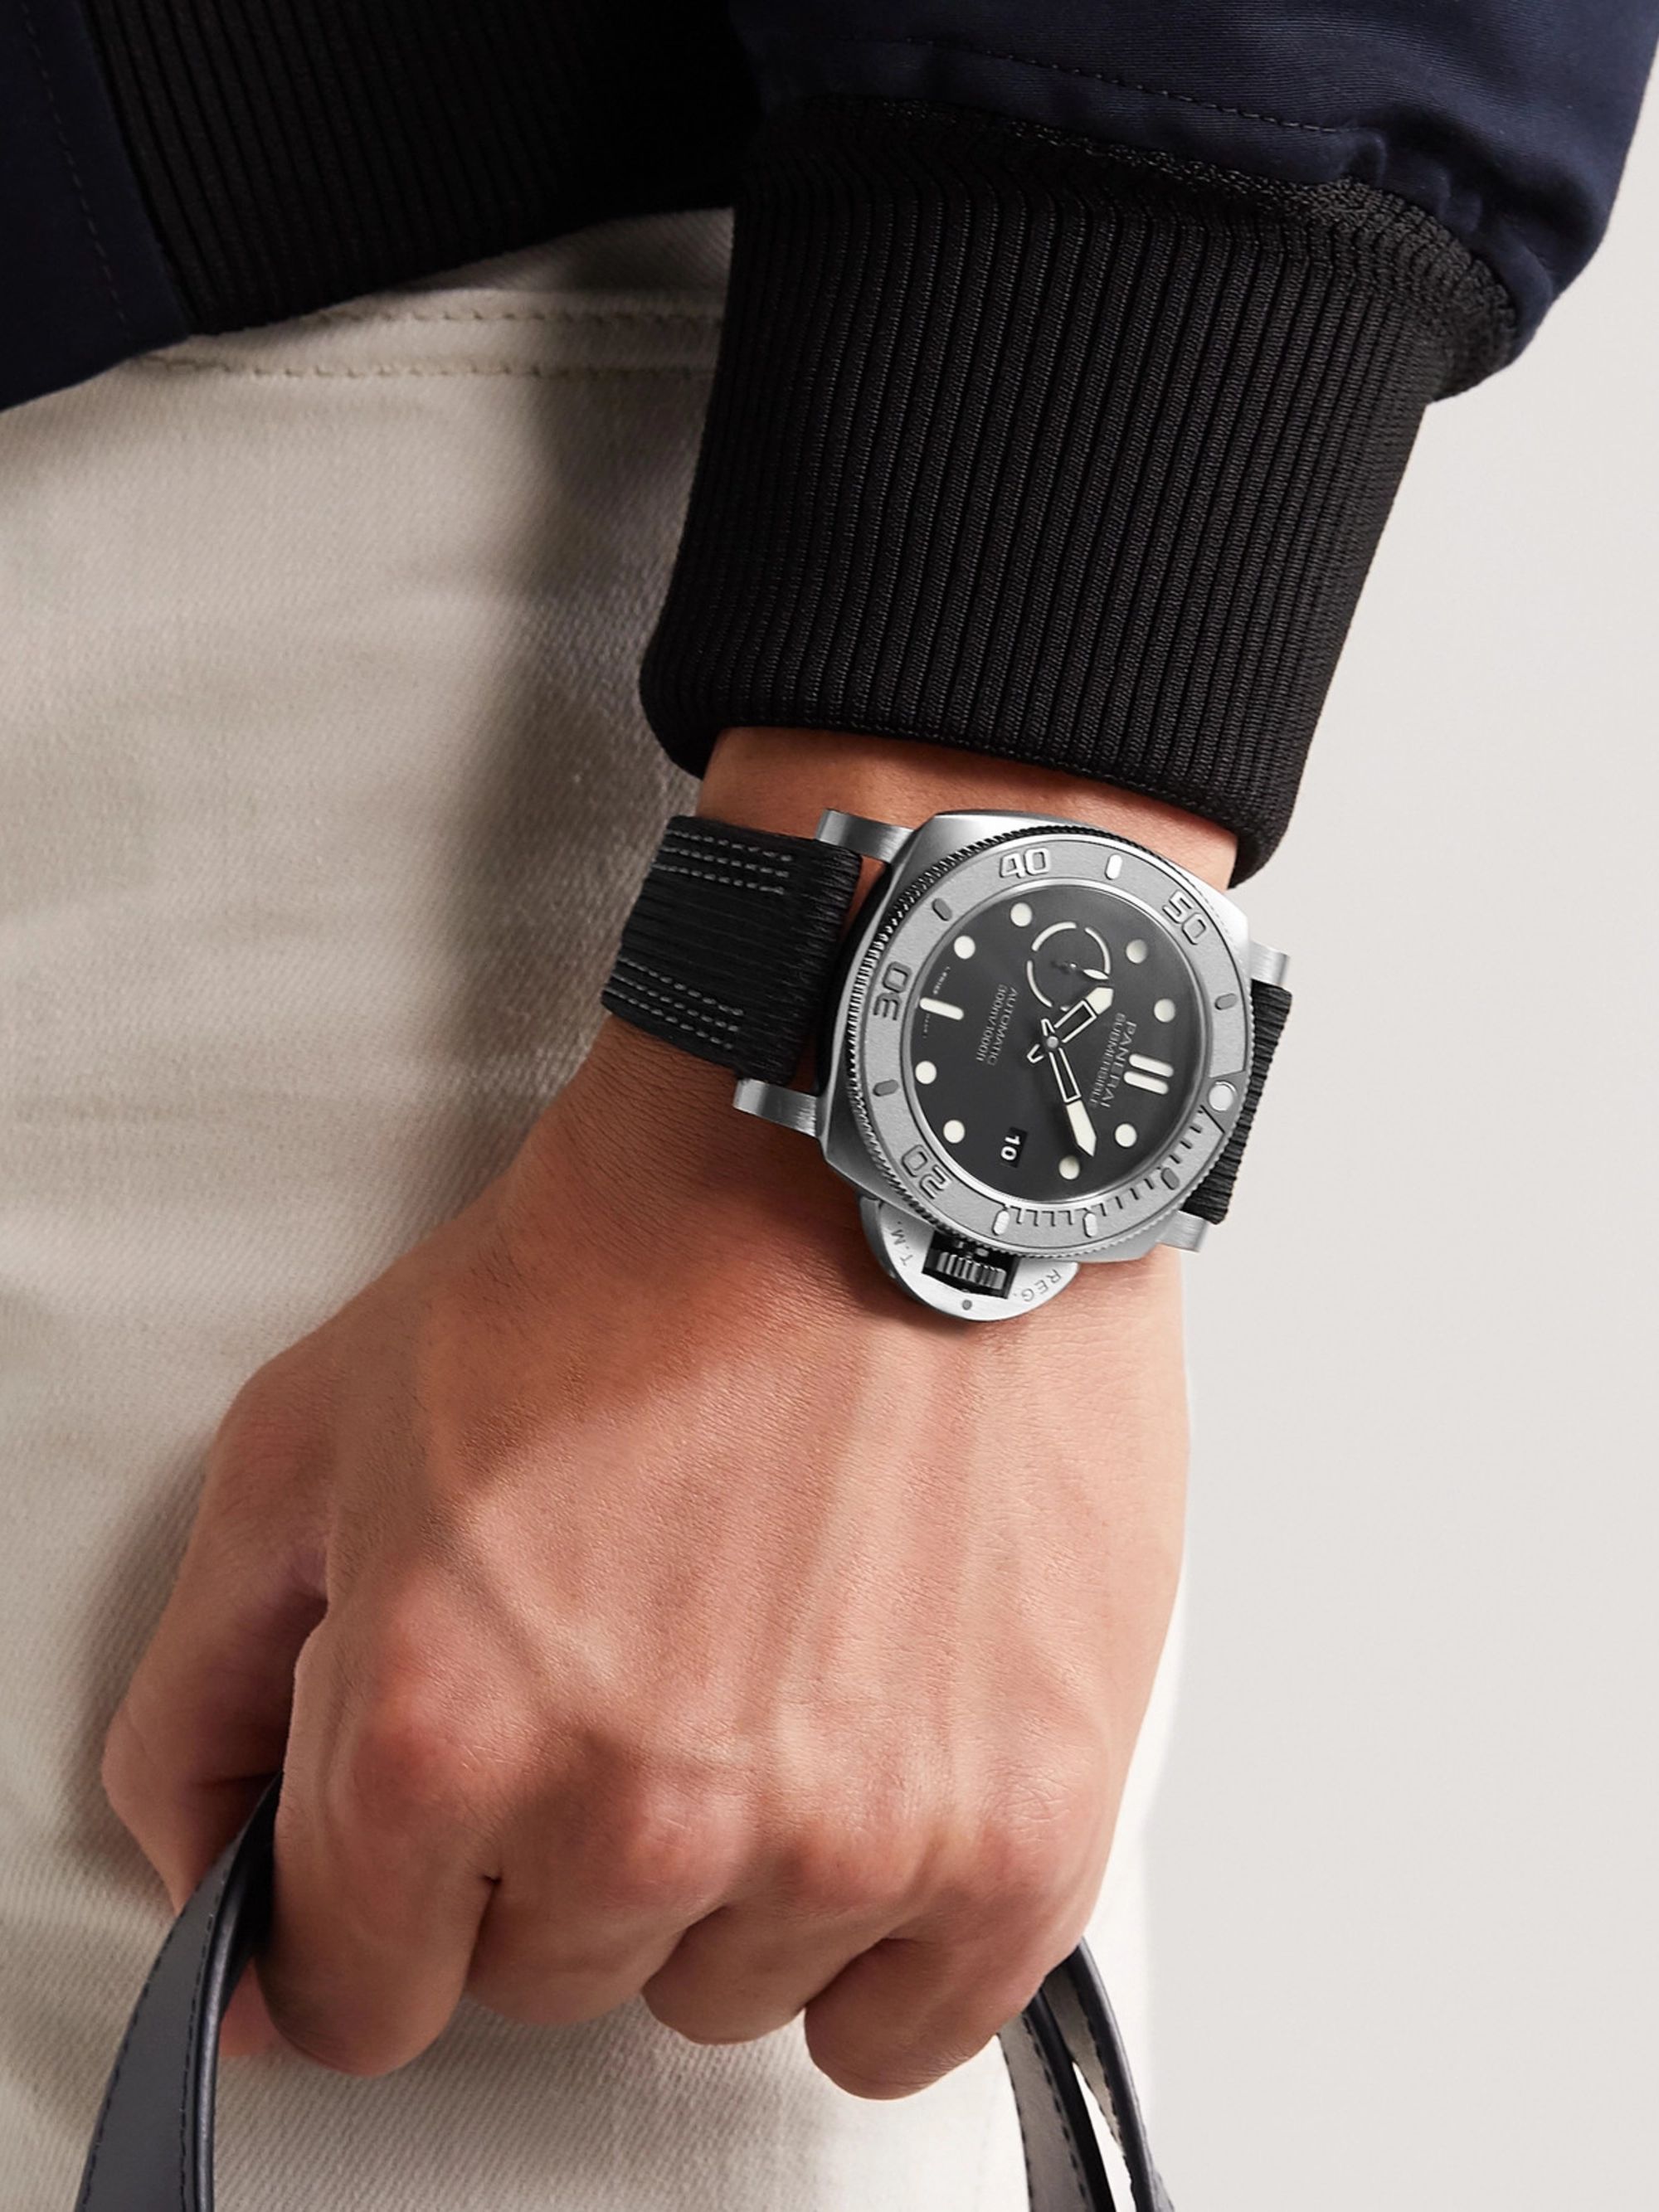 PANERAI Submersible Mike Horn Edition Automatic 47mm Eco-Titanium and PET Watch, Ref. No. PAM00984